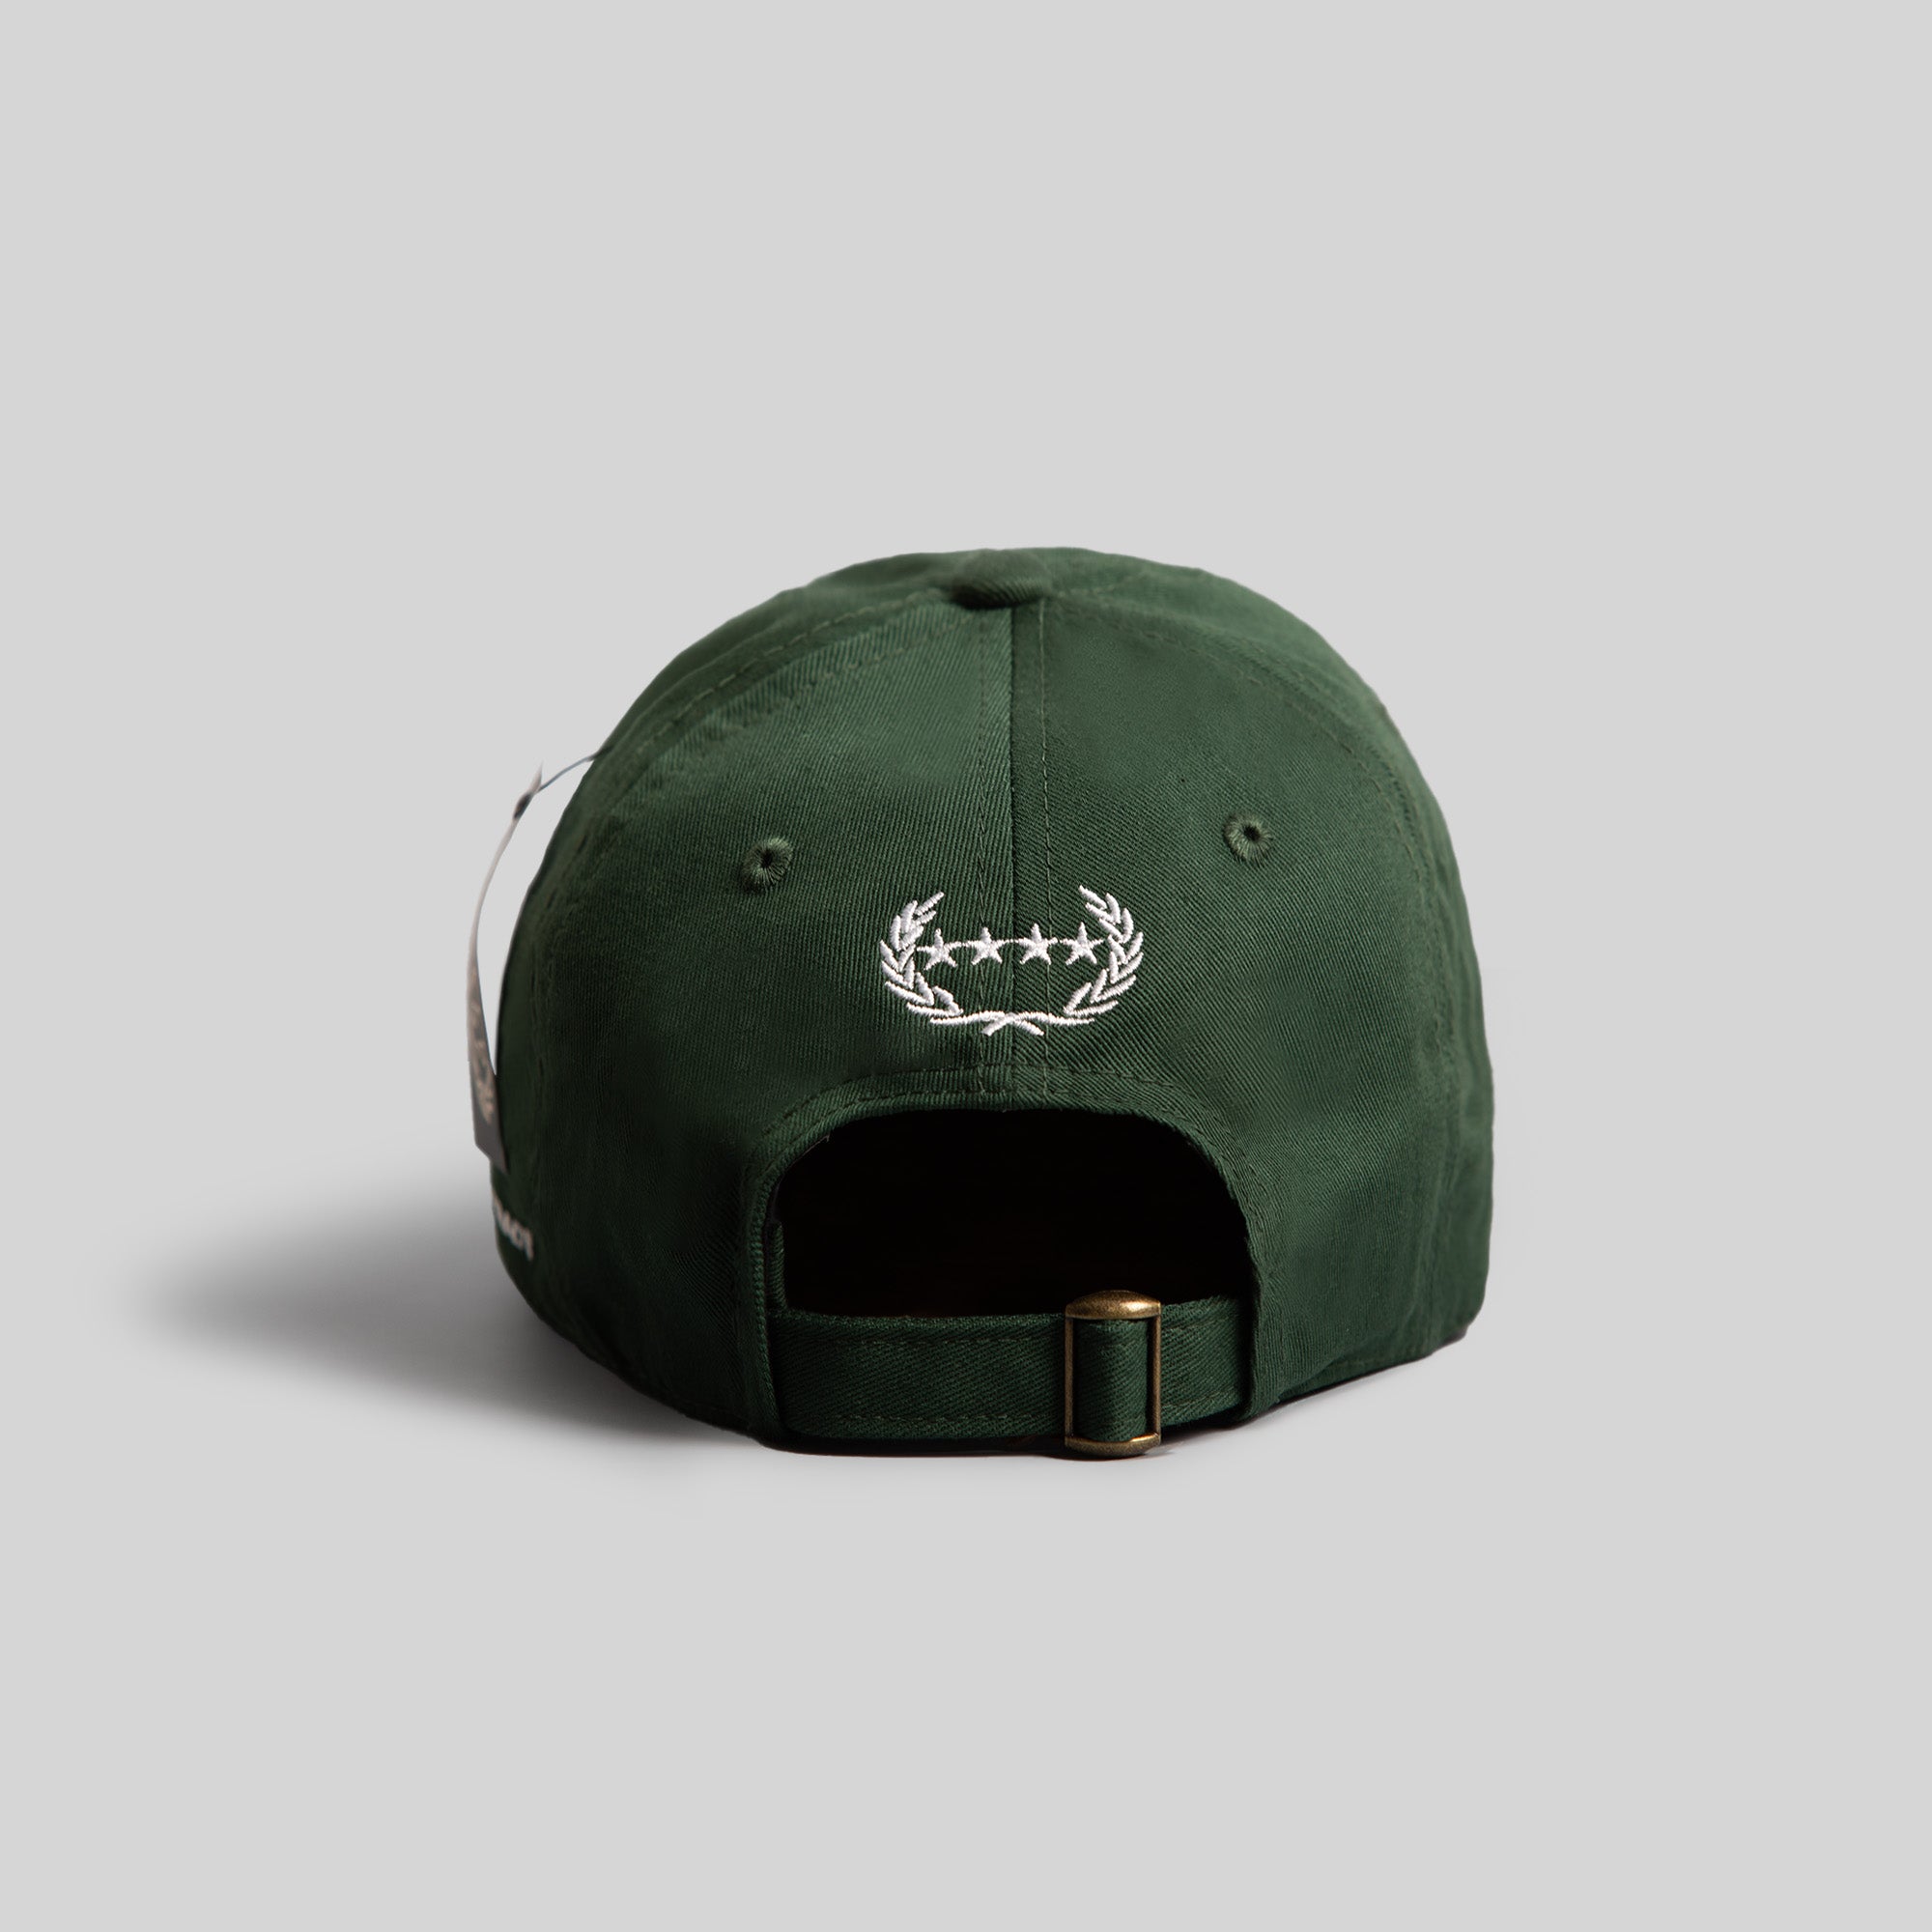 NO F*CKS GIVEN FG GREEN RELAXED FIT HAT